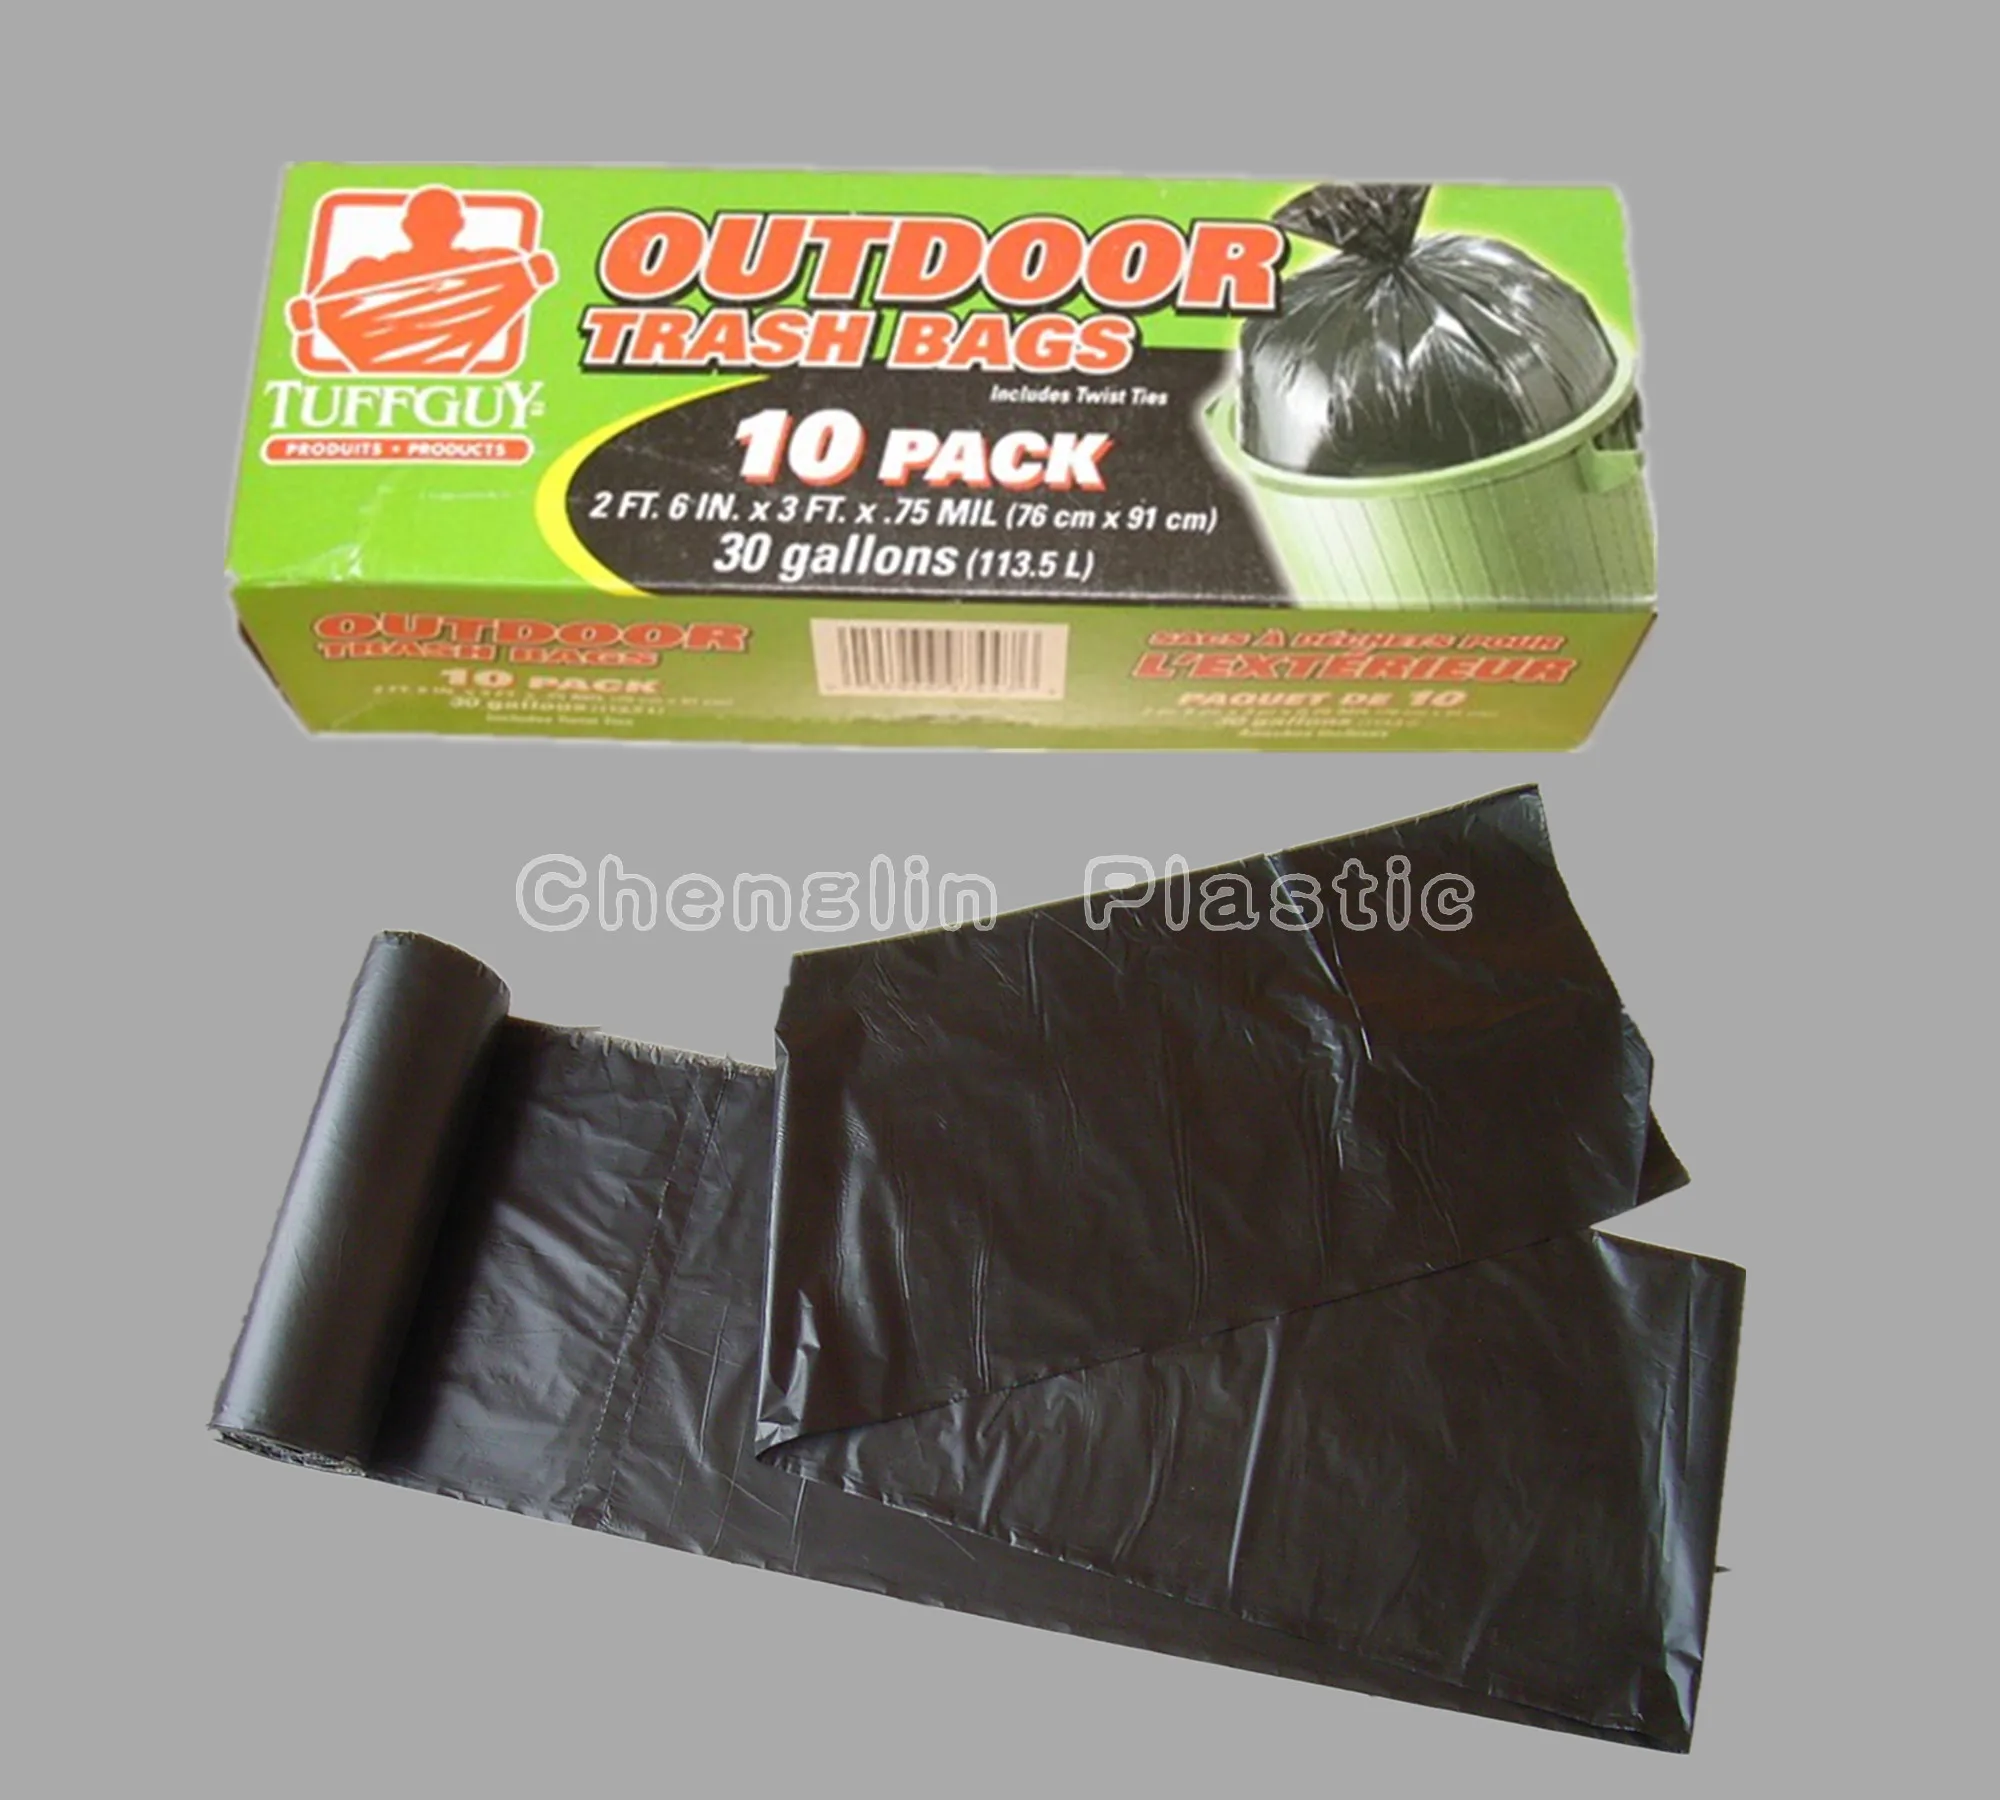 Household cleaning garbage bags